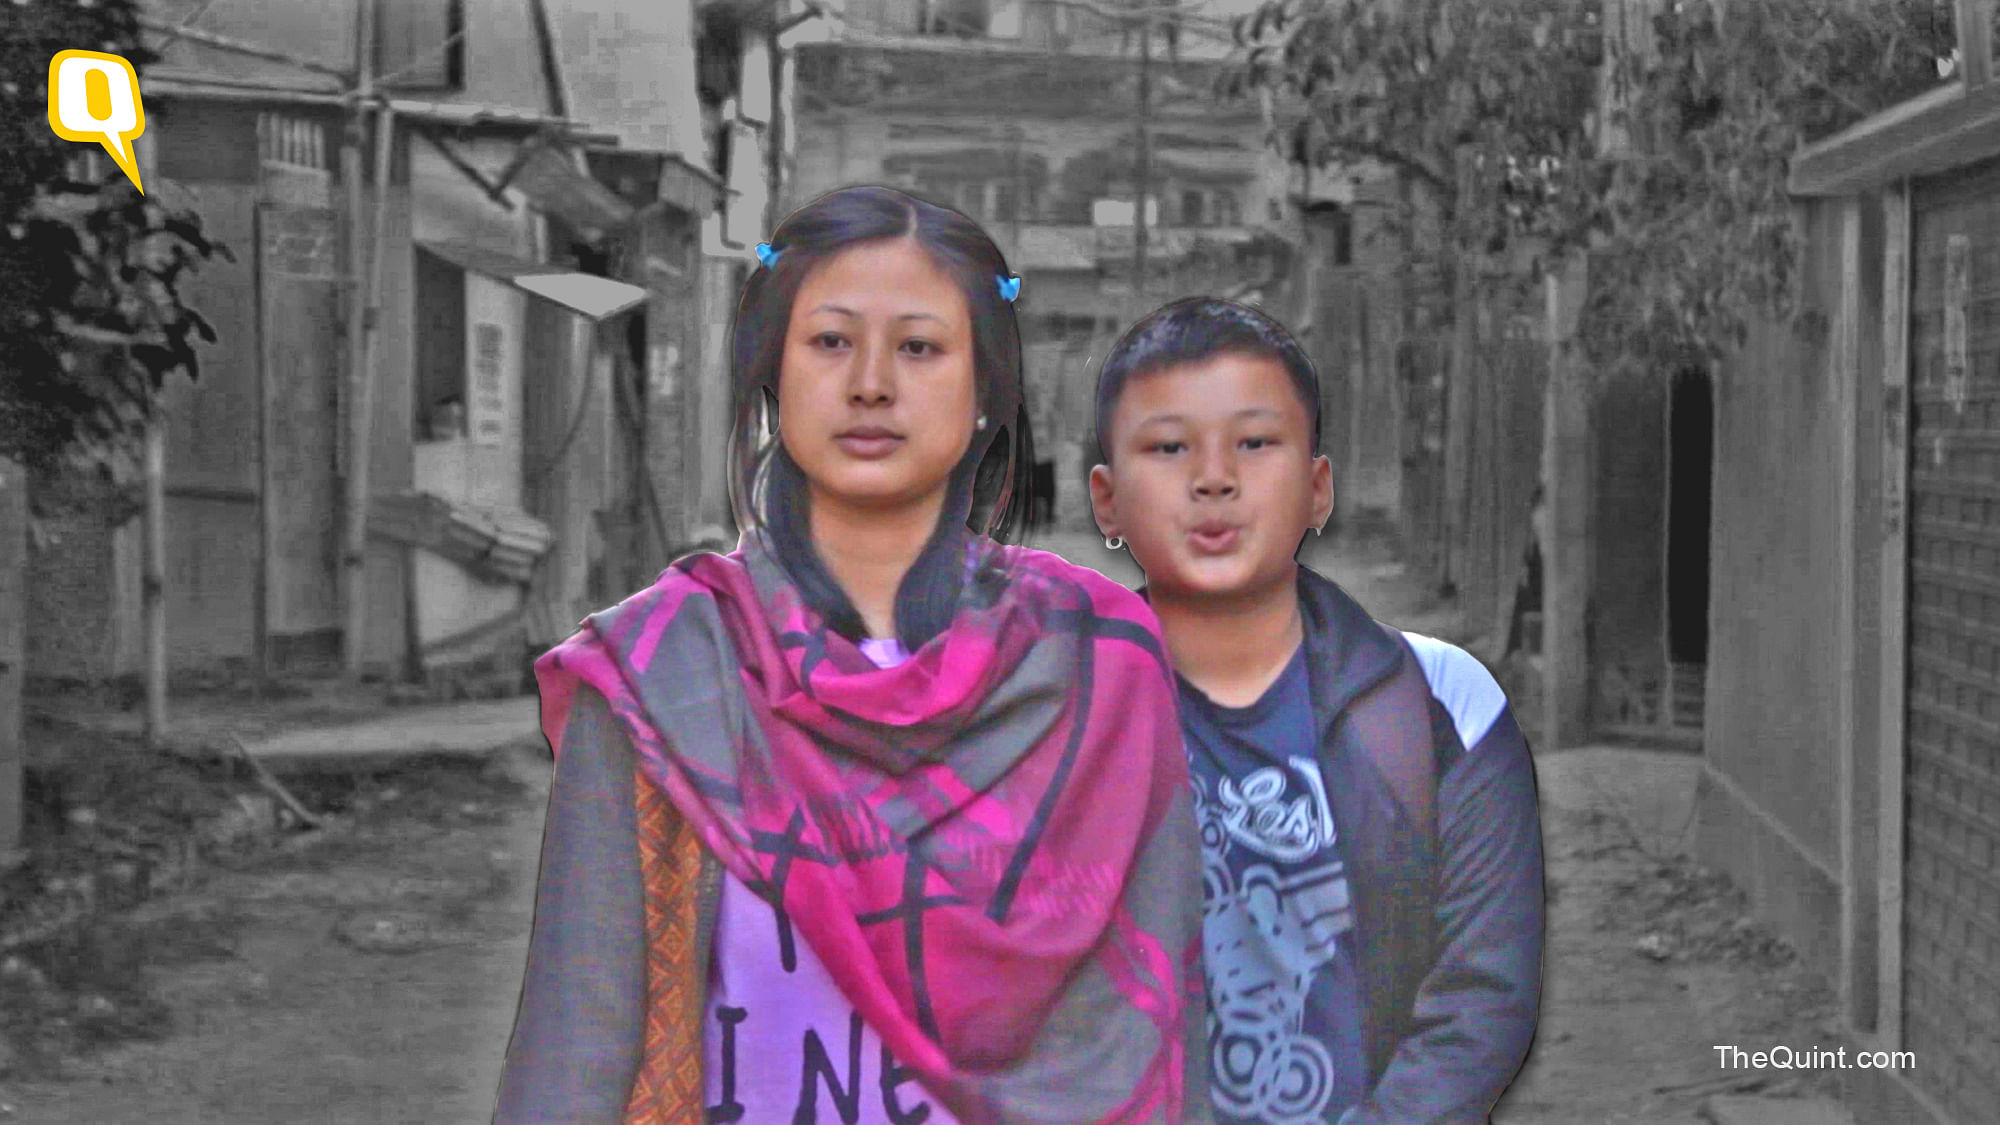 Anurag Nongmaithem lost his father in a fake encounter when he was one. His mother Neena, a member of EEVFAM, is fighting against extrajudicial killings in Manipur.